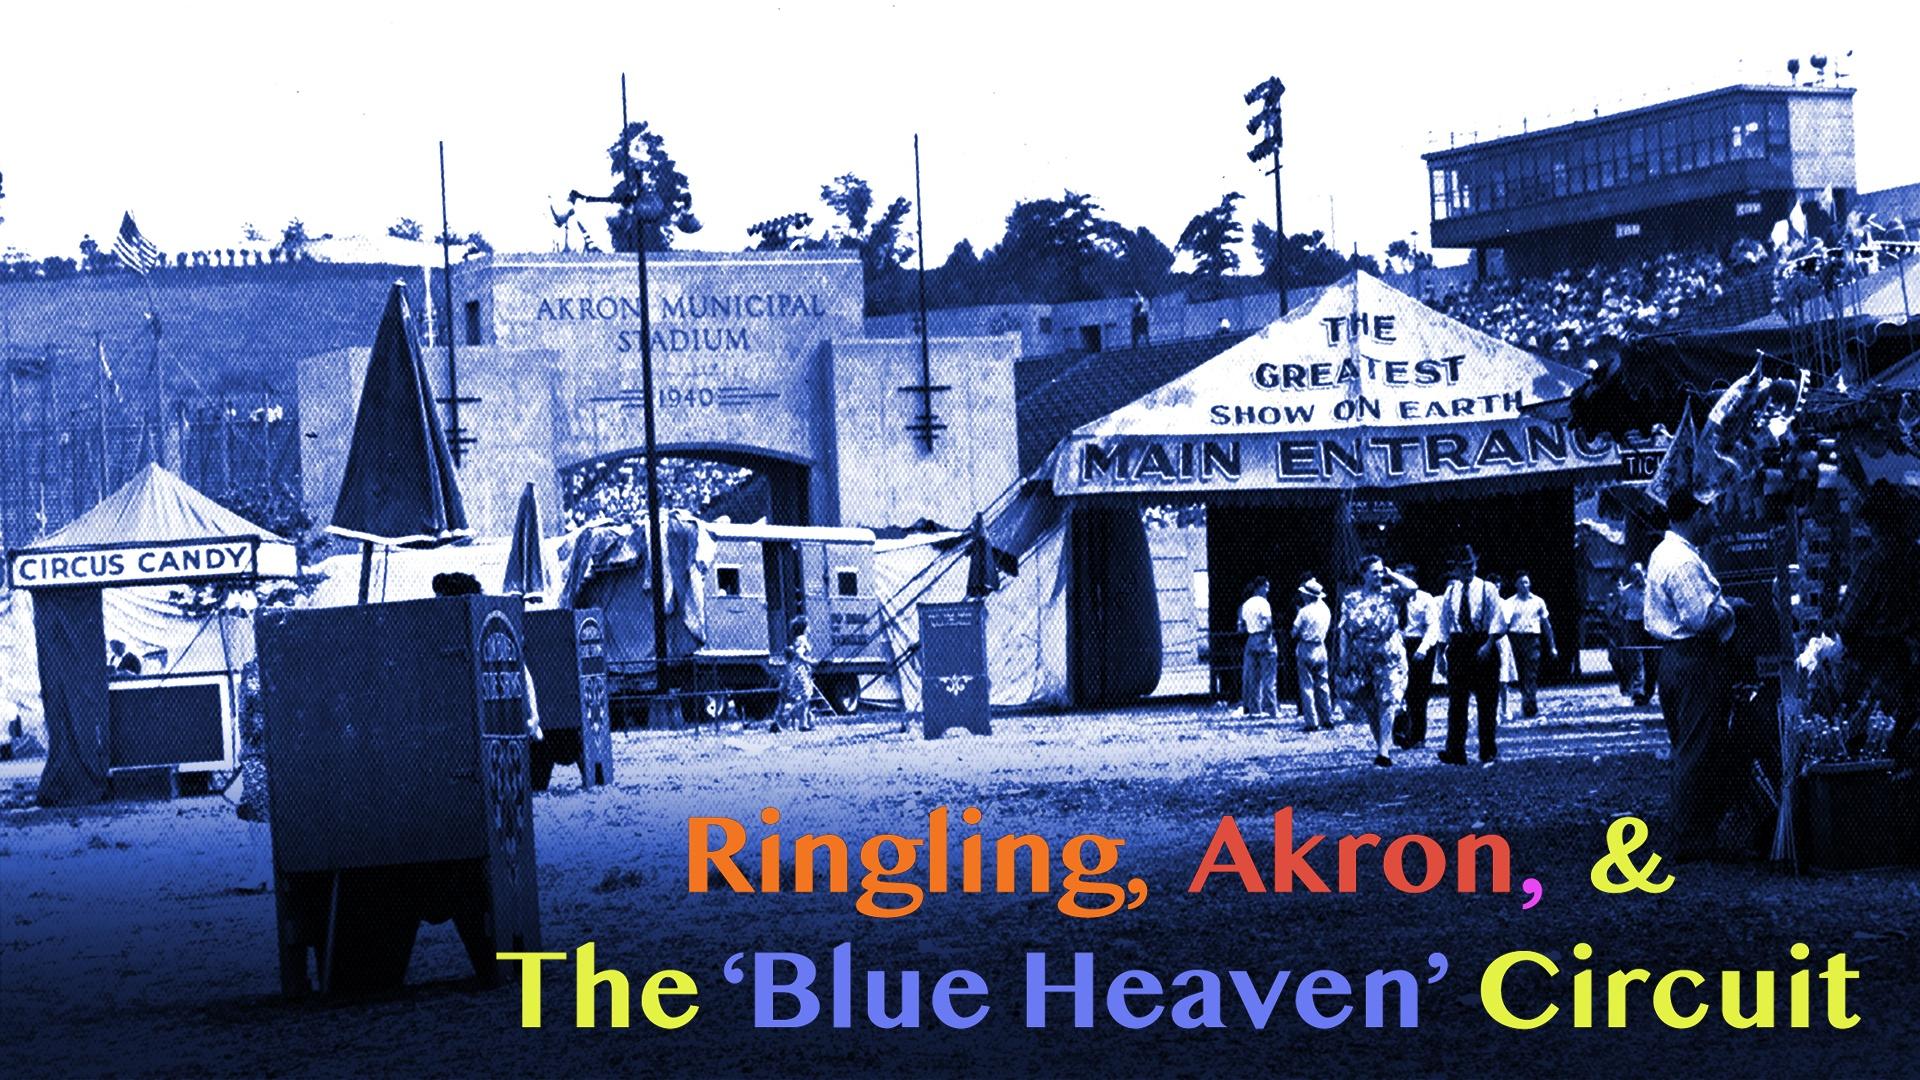 Ringling, Akron, and the 'Blue Heaven' Circuit